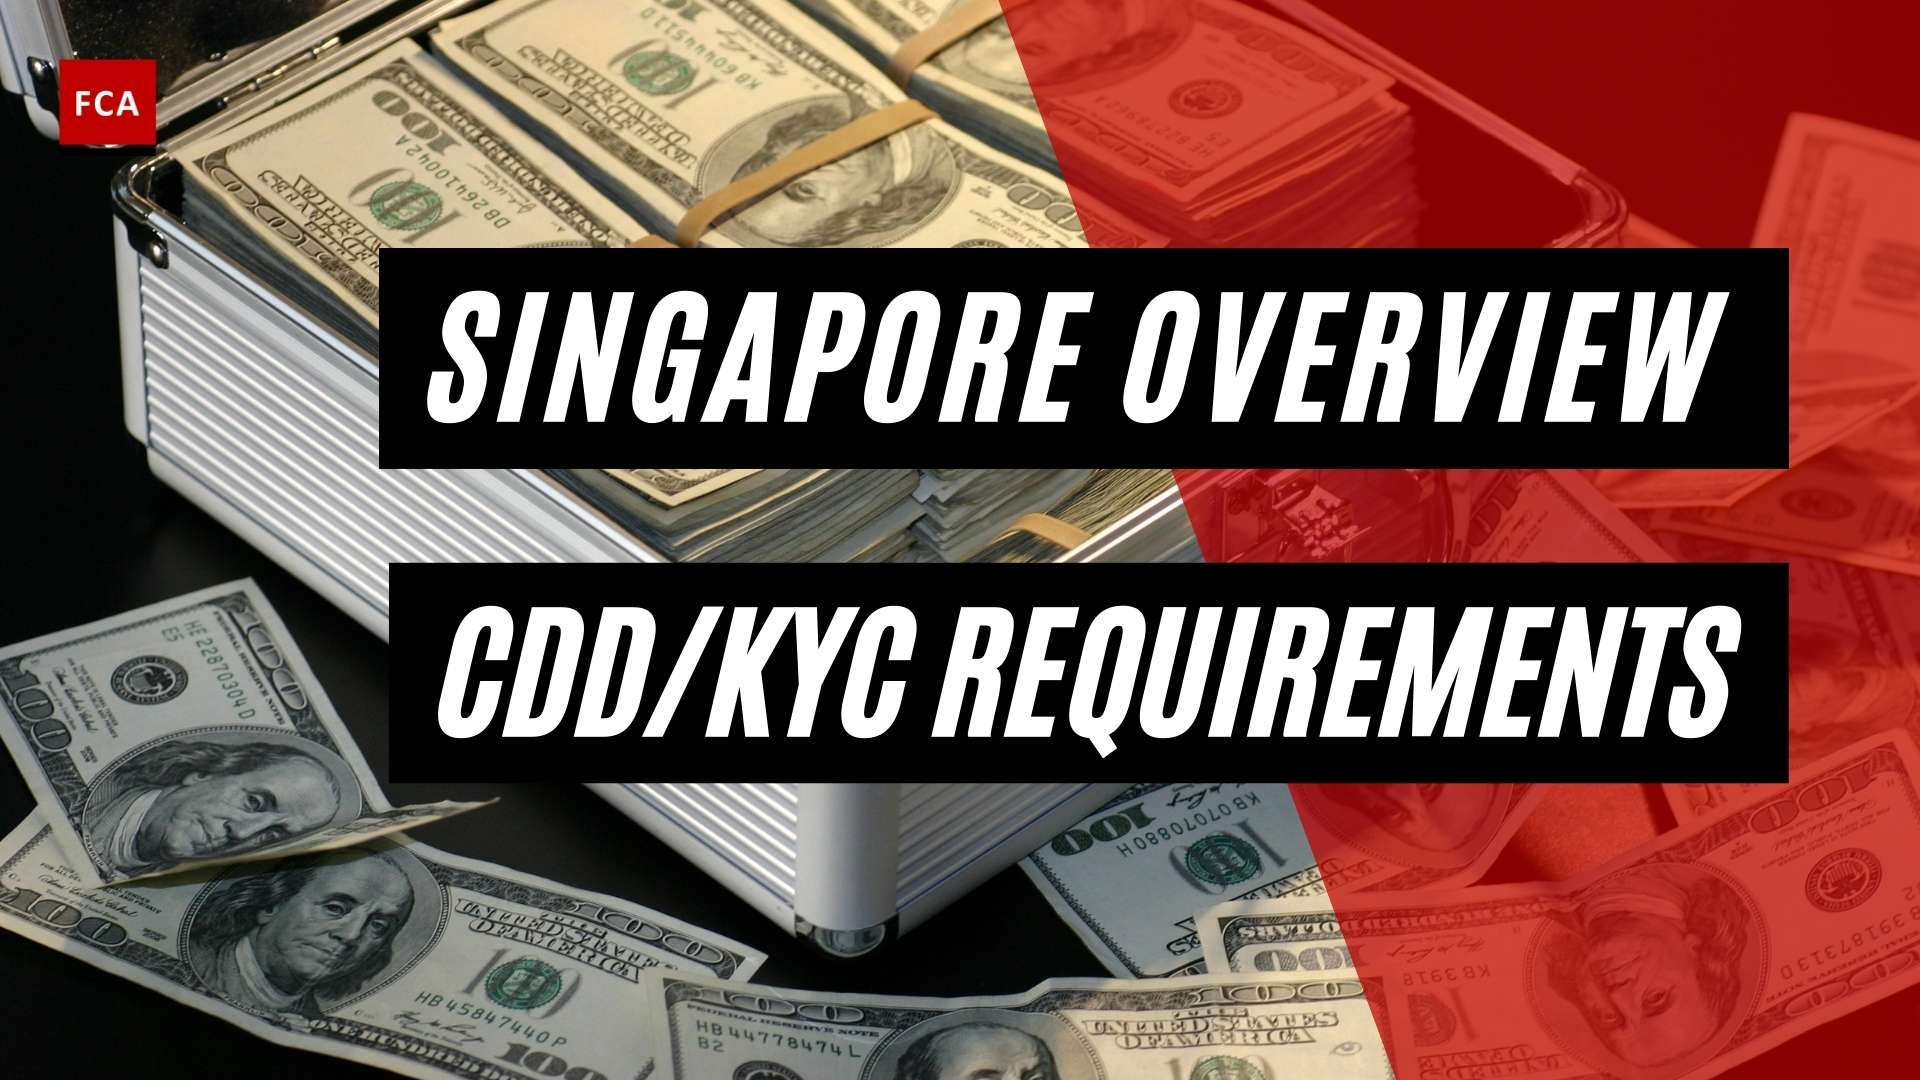 Important Overview Of Key Regulation And Cdd And Kyc Requirements In Singapore In 2022 - Featured Image